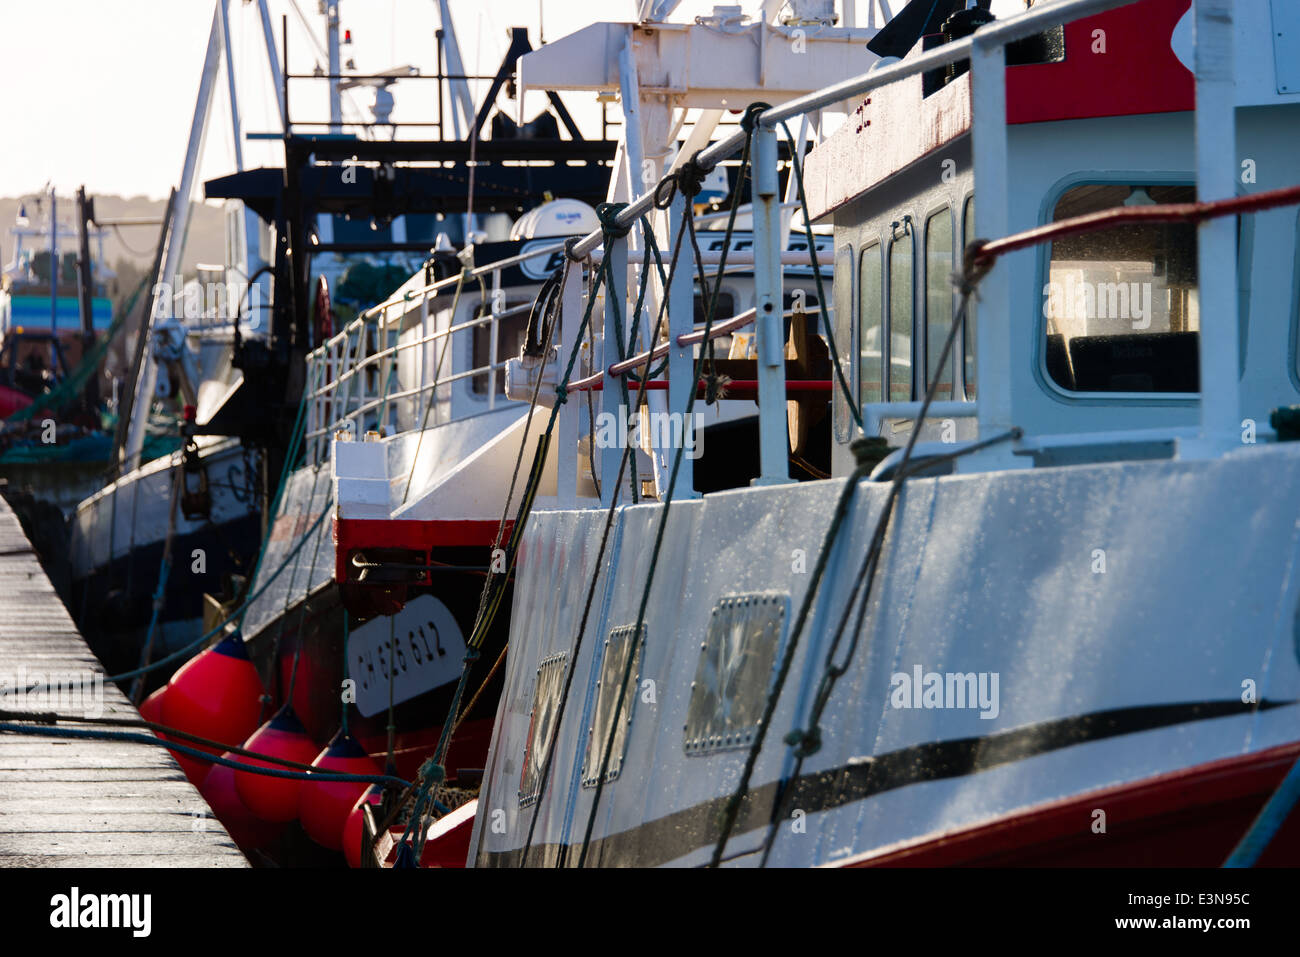 Fishing boats docked on the quay, Port-en-Bessin, Normandy, France Stock Photo